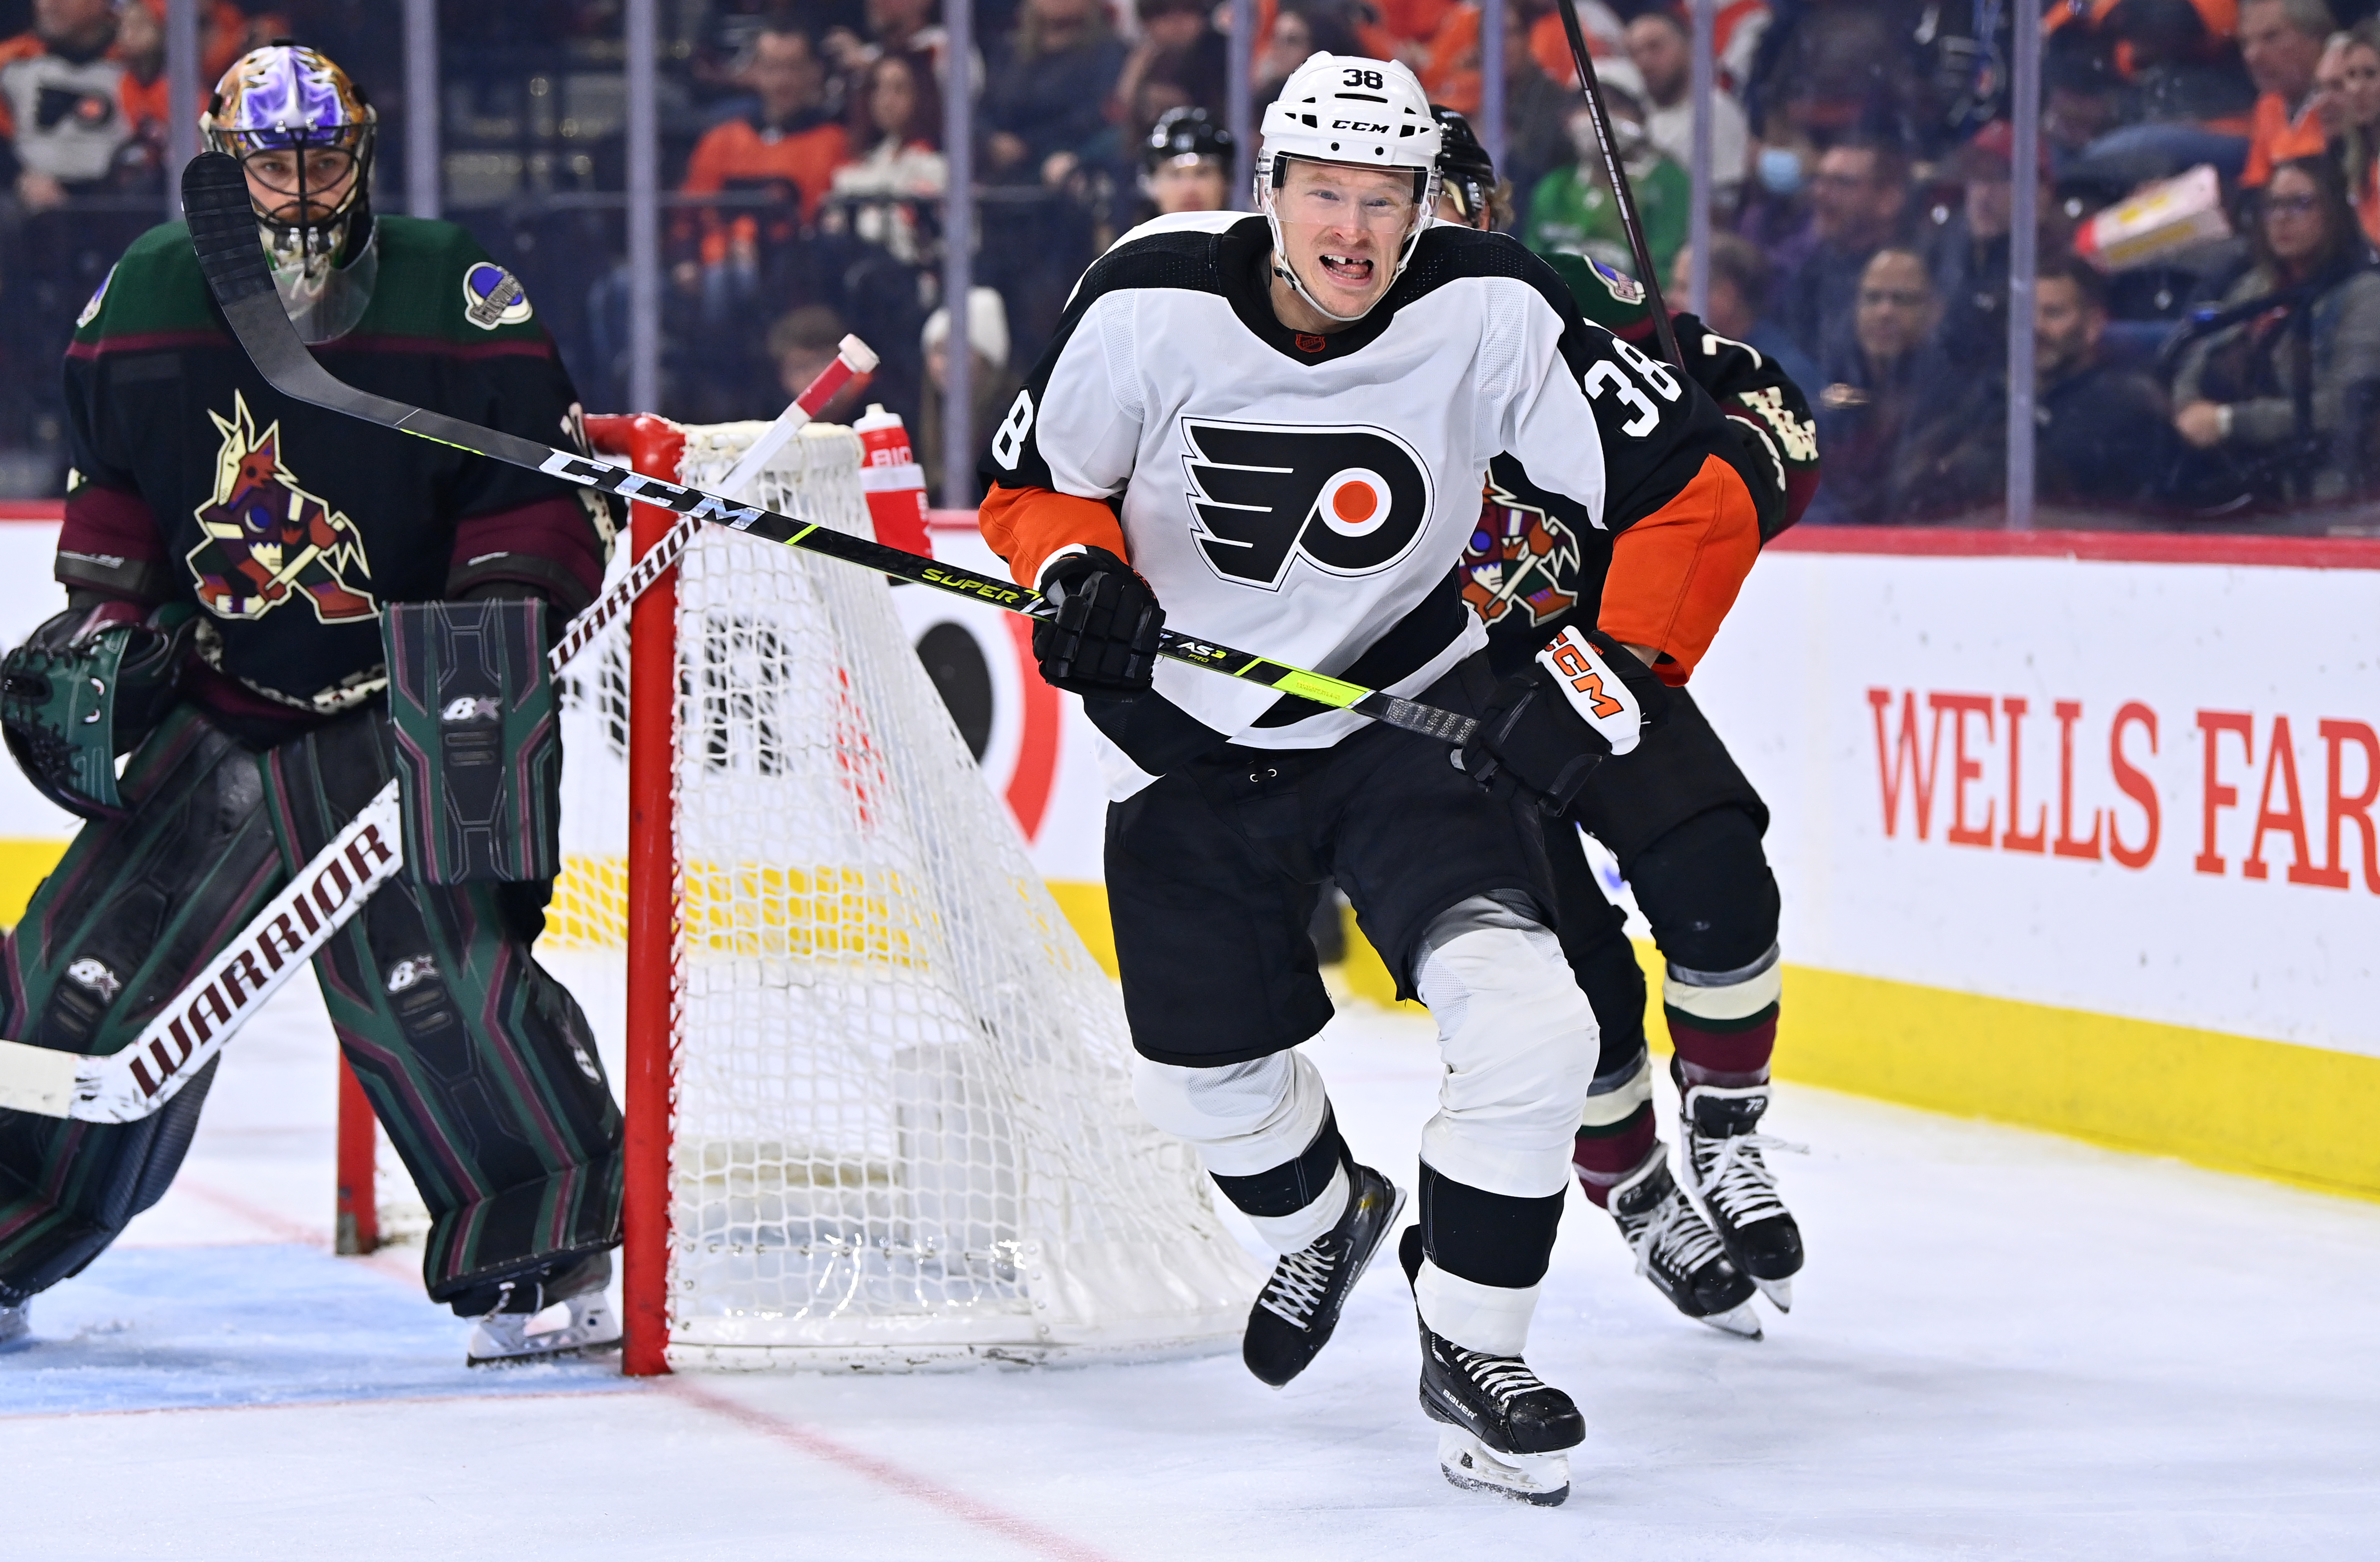 NHL Rumour: Philadelphia Flyers Forward Could Be Shipped Out